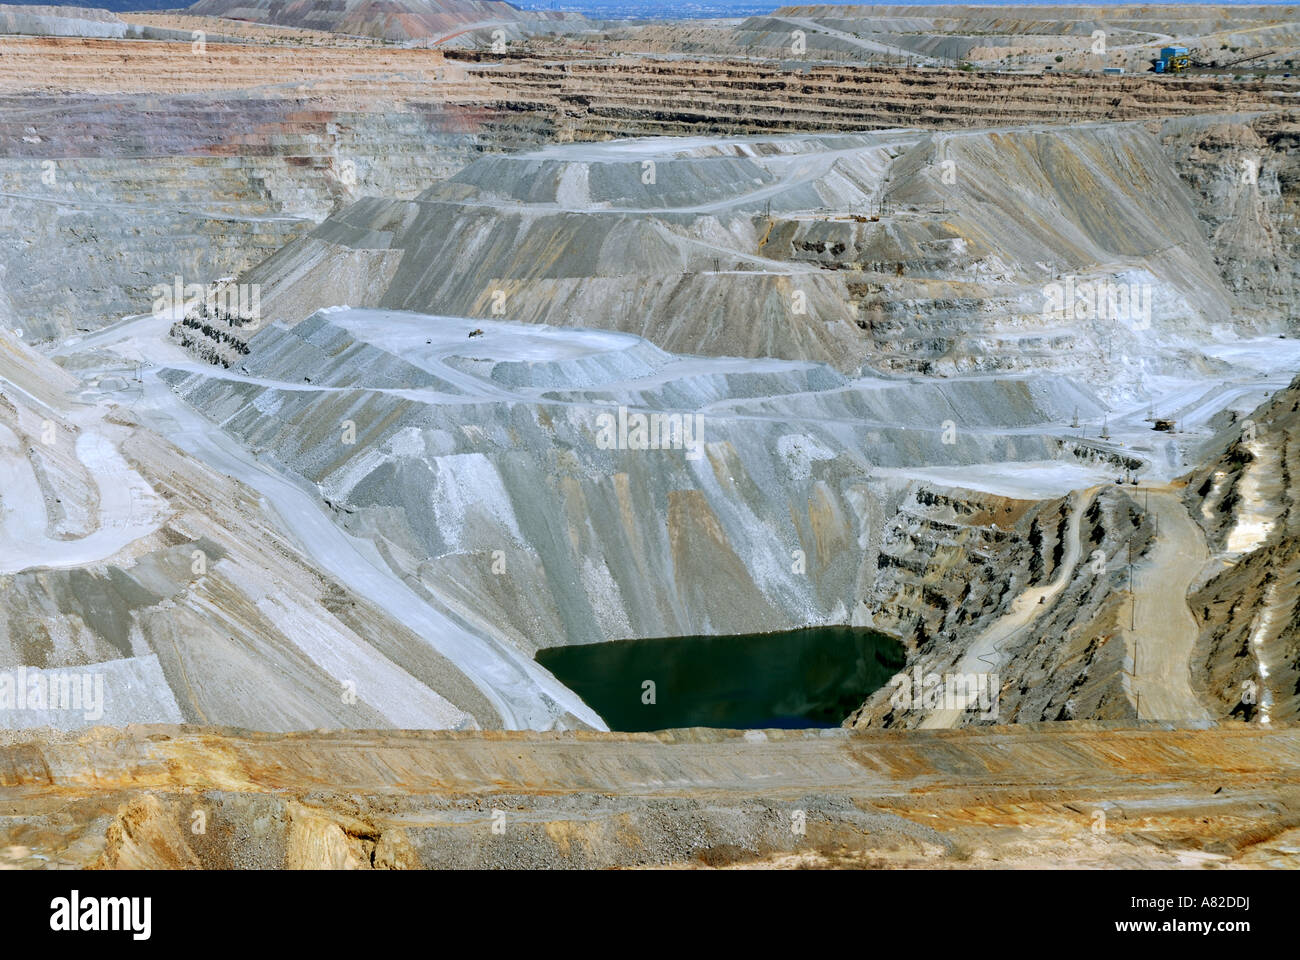 Open Pit Mine in southern Arizona Stock Photo